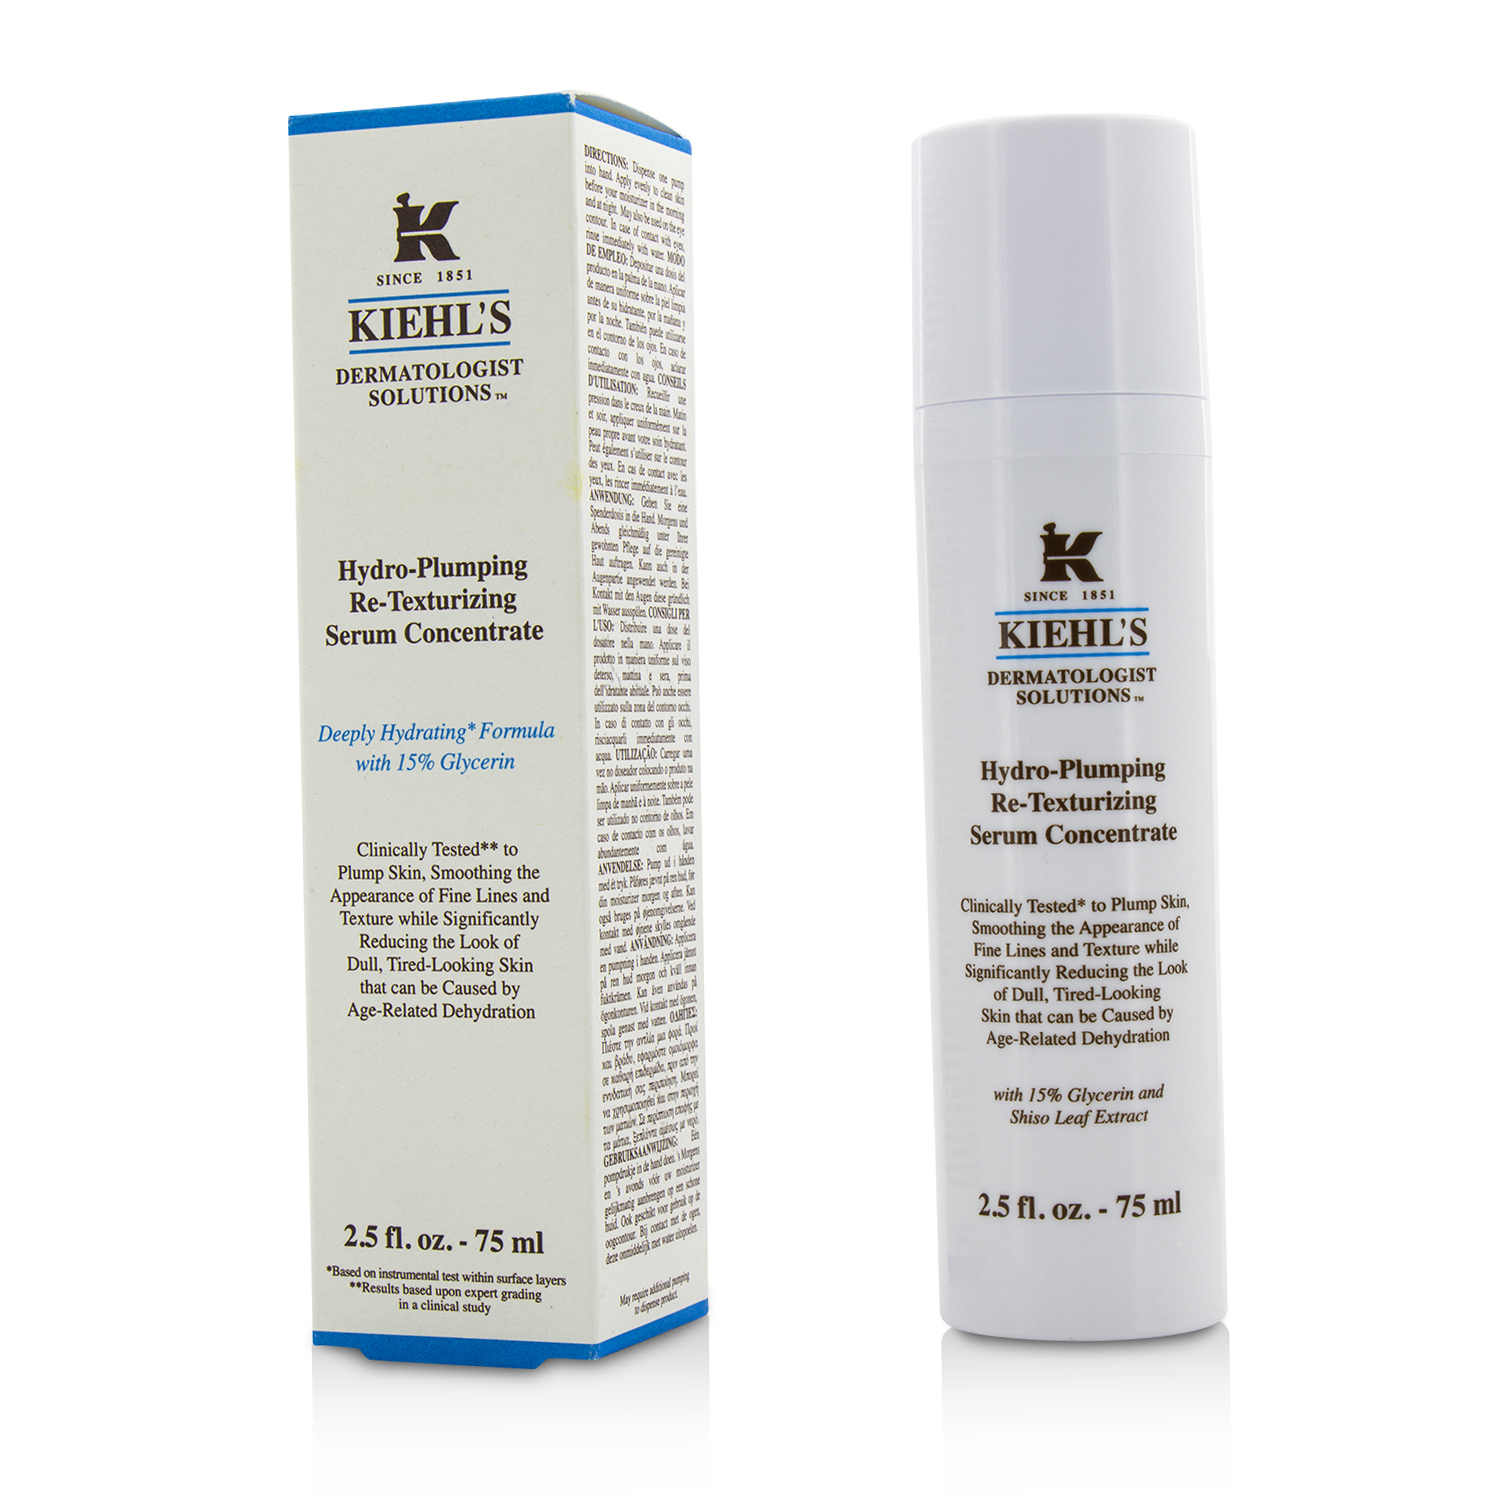 Hydro-Plumping Re-Texturizing Serum Concentrate Kiehls Image